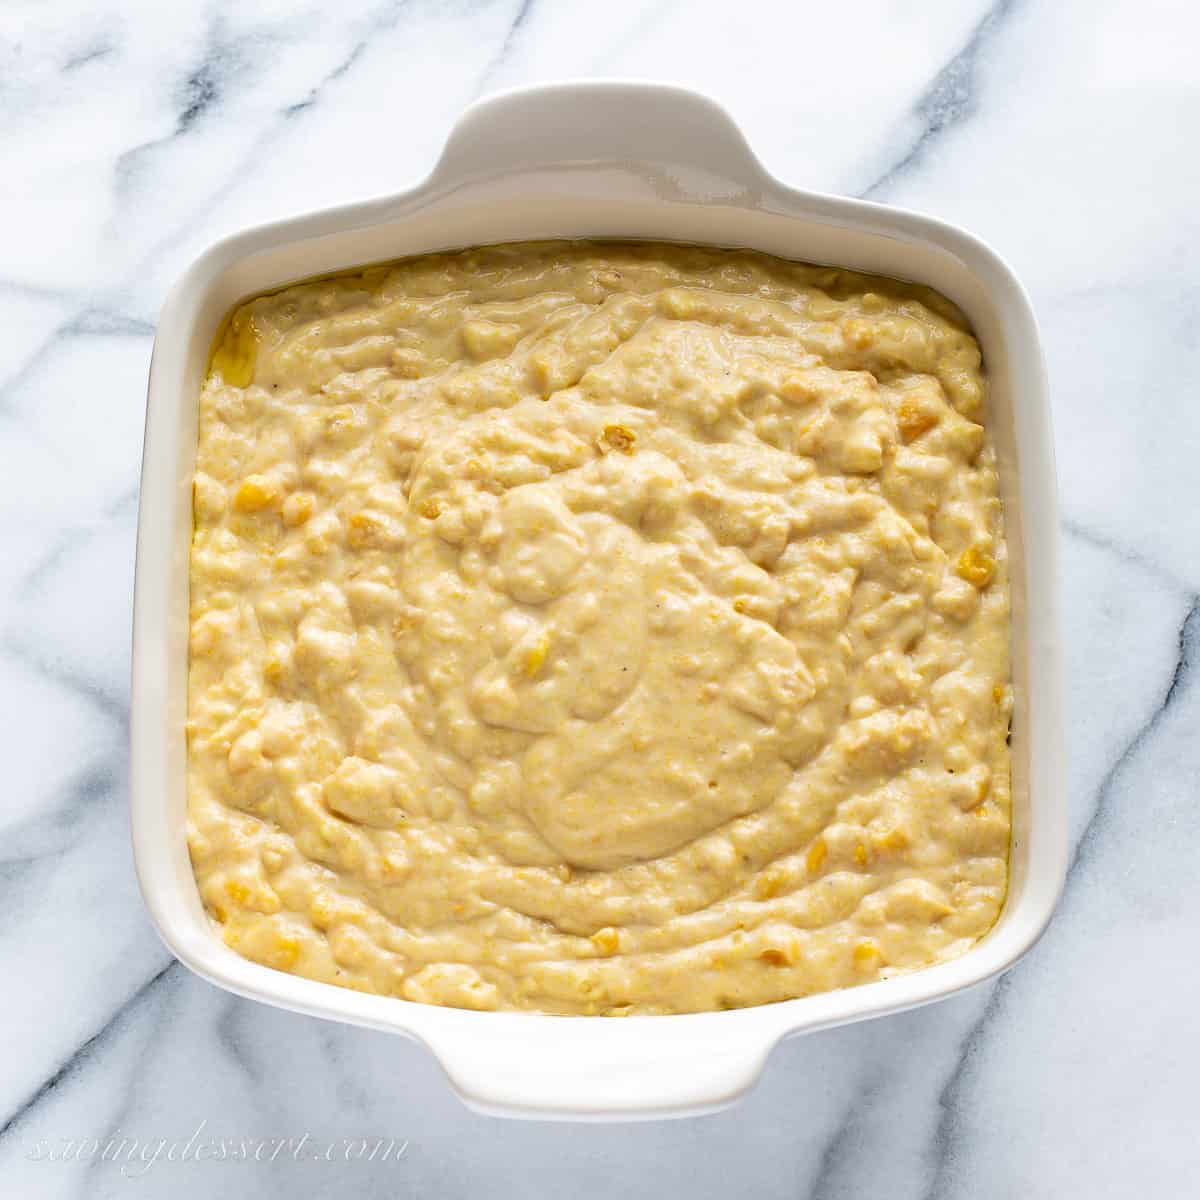 Overhead view of a casserole filled with corn pudding batter ready to bake